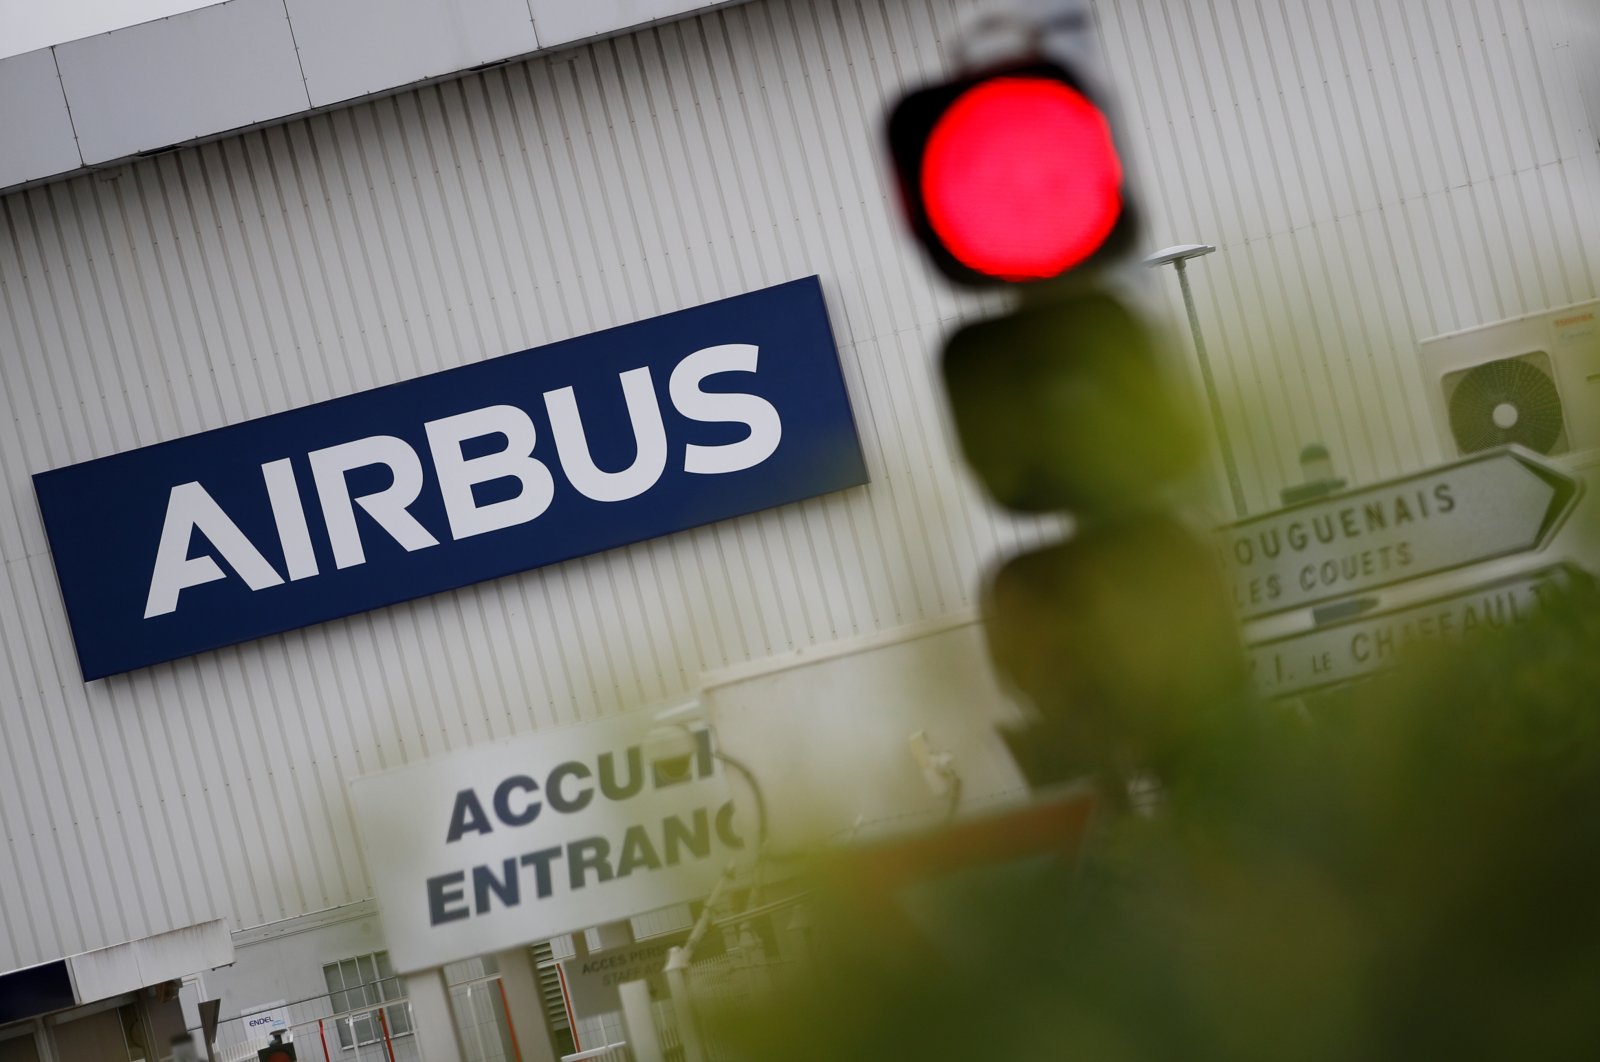 The logo of Airbus is pictured at the entrance of the Airbus facility in Bouguenais, near Nantes, France, June 30, 2020. (Reuters Photo)